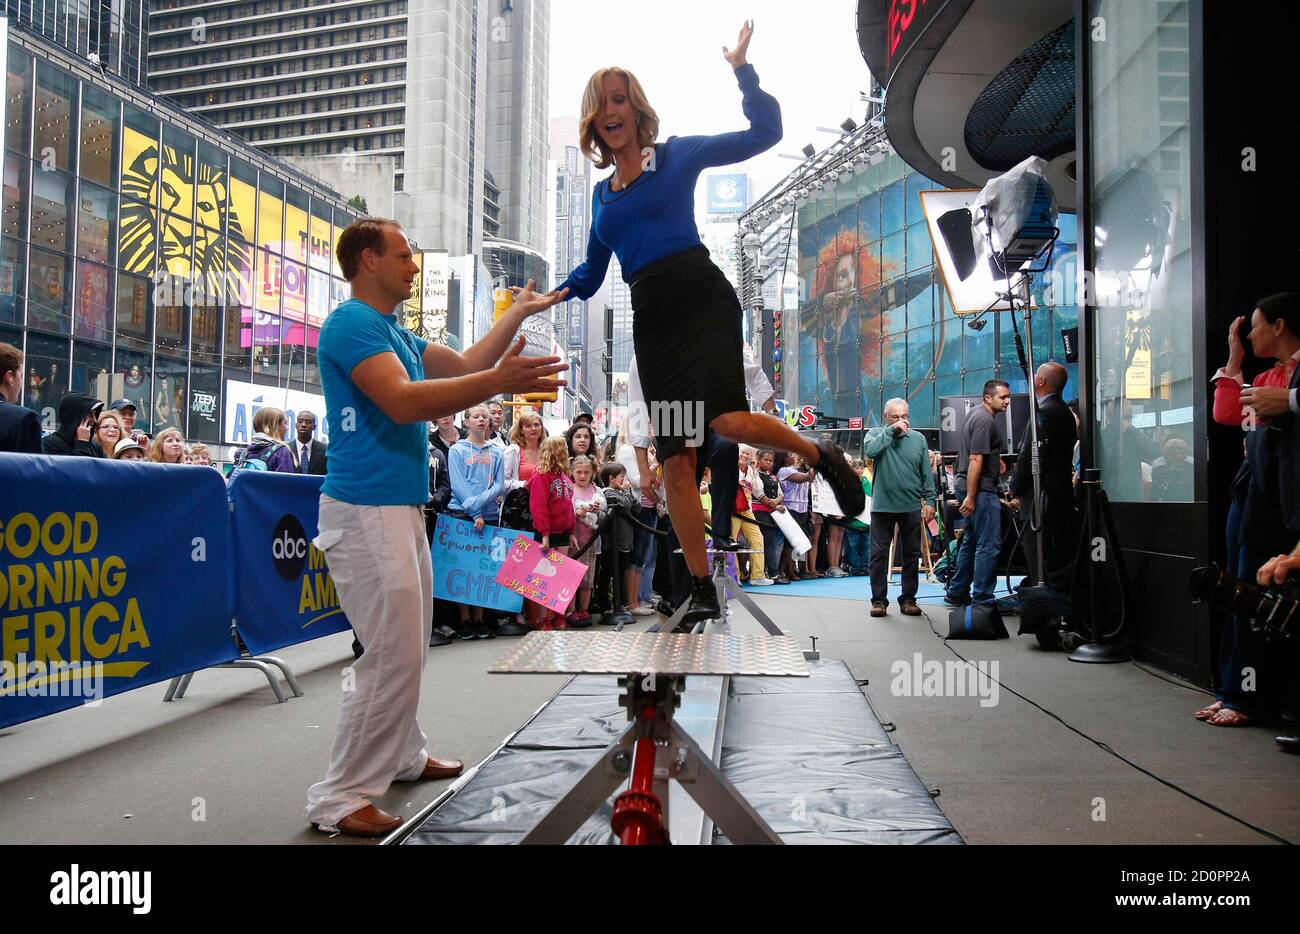 Daredevil Nick Wallenda (L) helps ABC's Lara Spencer walk on a tightrope  wire outside the set of ABC's Good Morning America program in New York City  June 13, 2012. Wallenda, 33, a